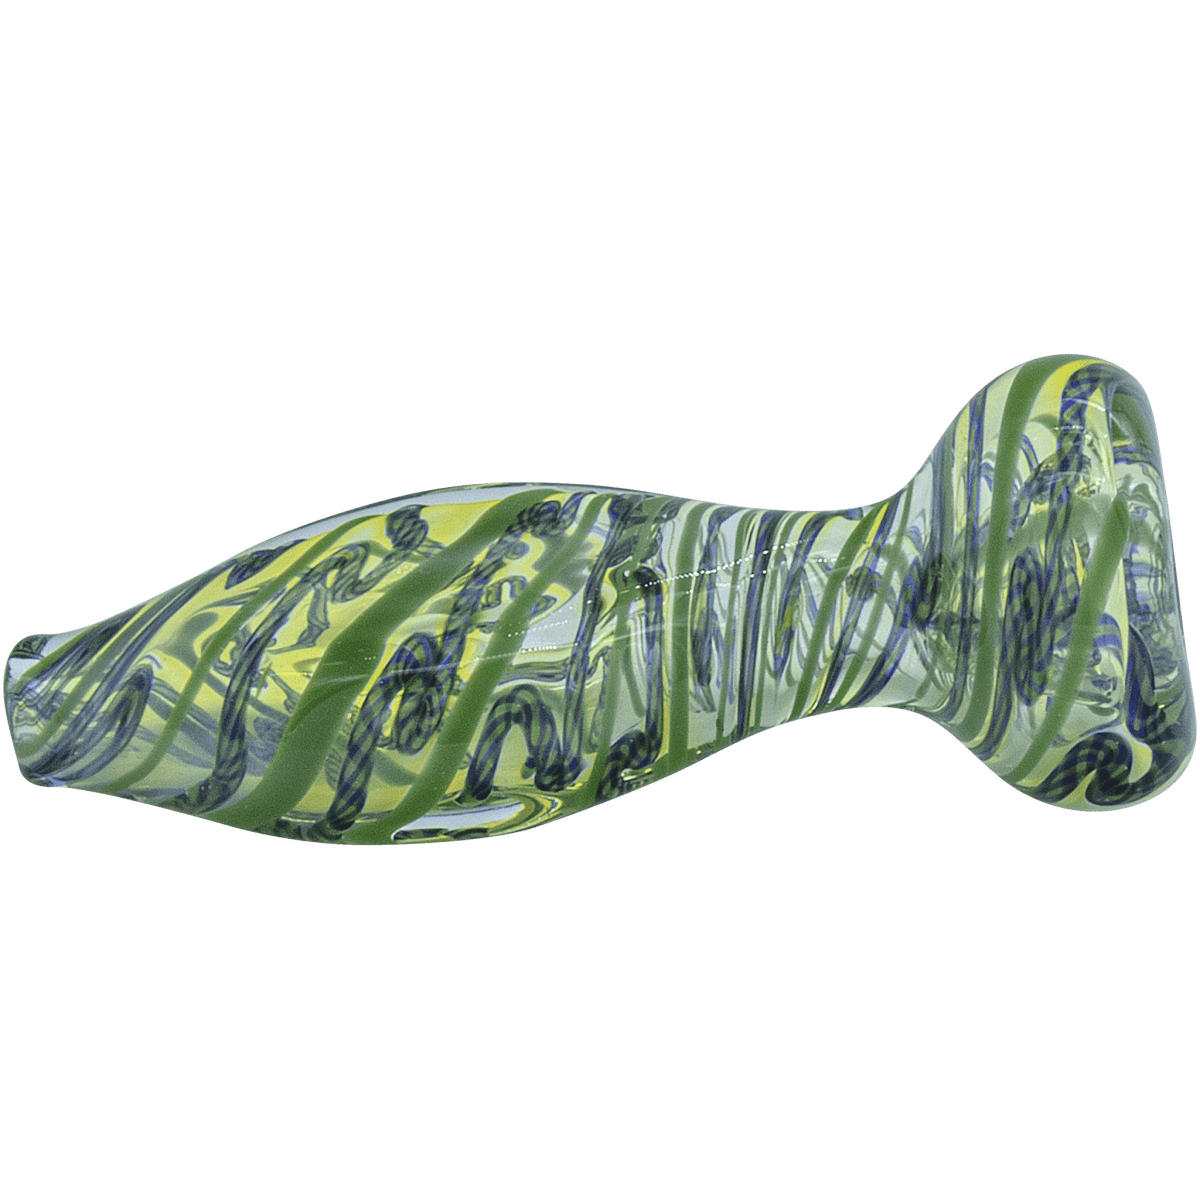 LA Pipes Hand Pipe "Flat Belly" Inside-Out Chillum